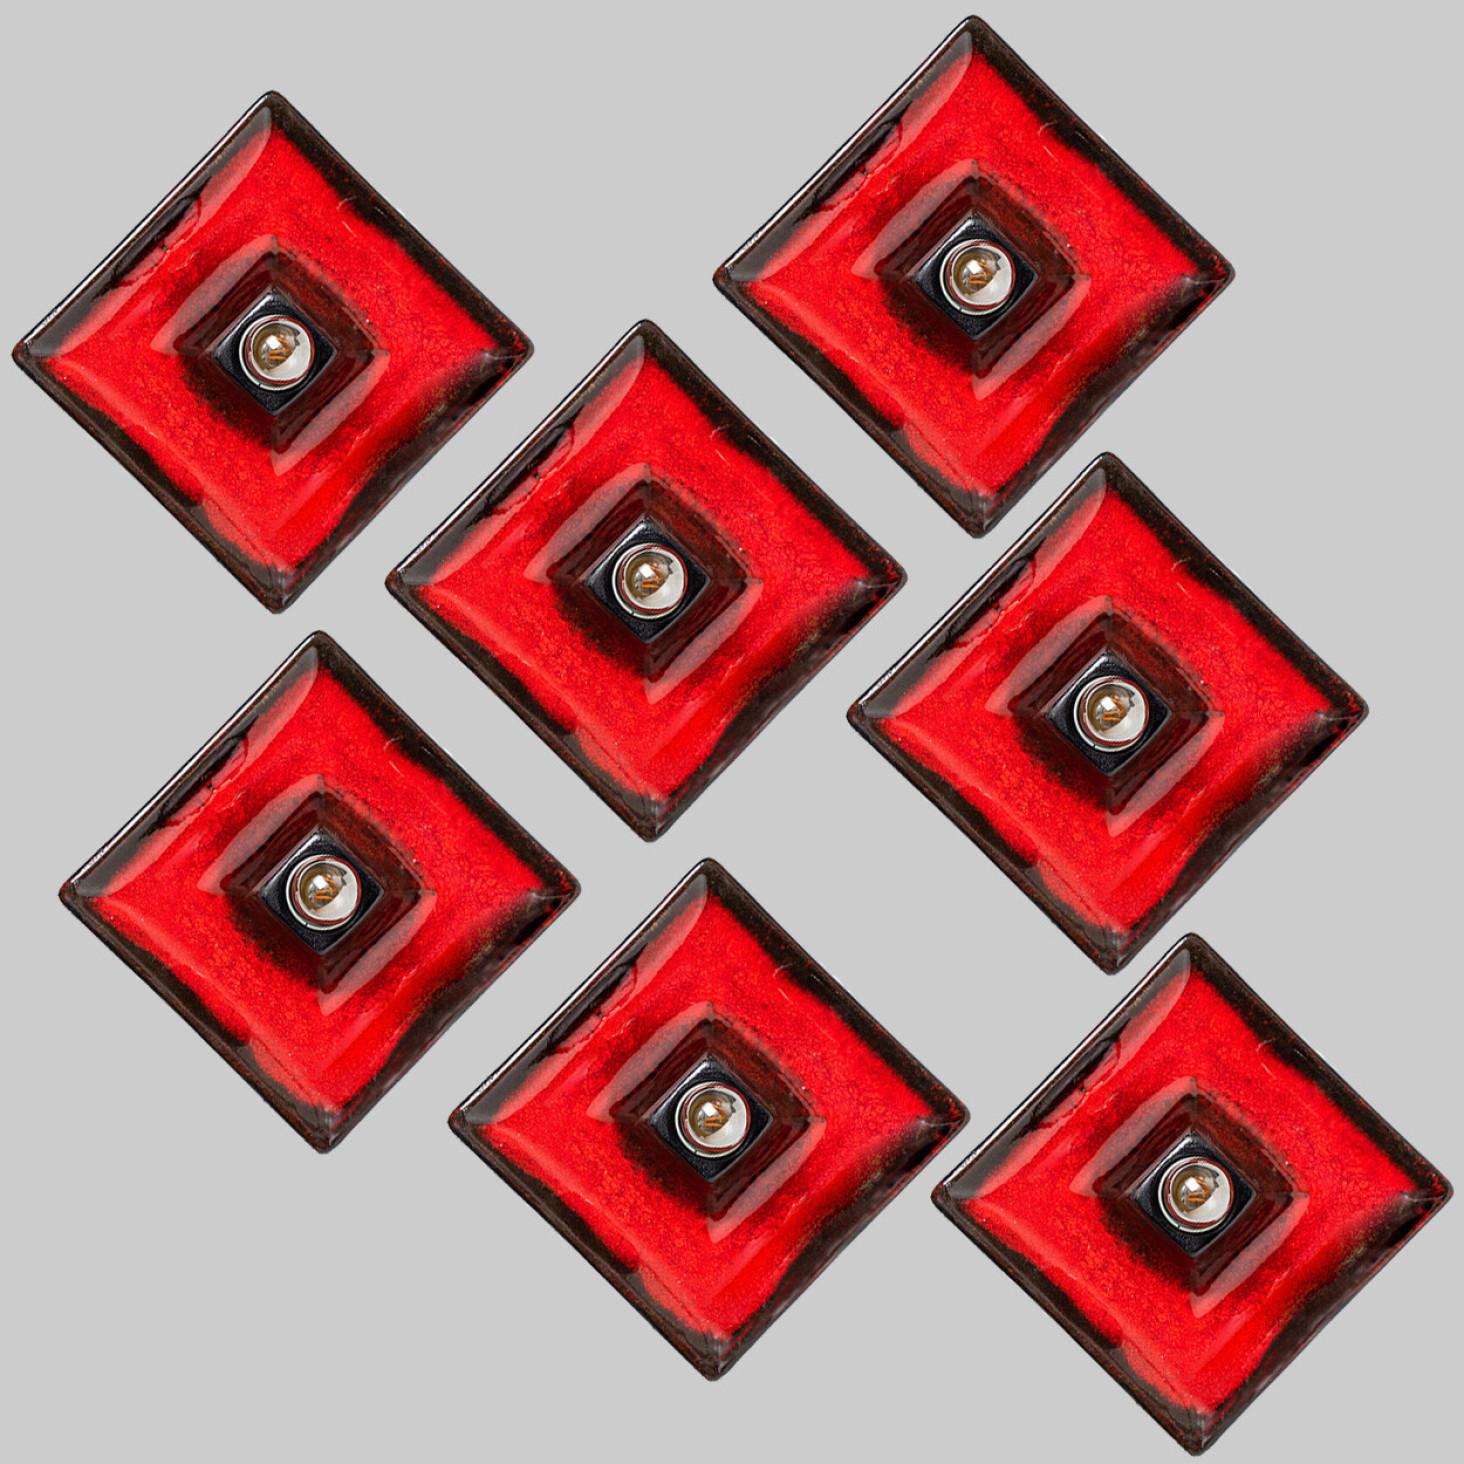 this spectacular graphical red dark brown  ceramic wall lights manufactured in Germany in the 1970s.

The glaze is in a red and dark brown color.

We used  silver light bulbs (see images), but gold or white light bulbs are also very stylish (see